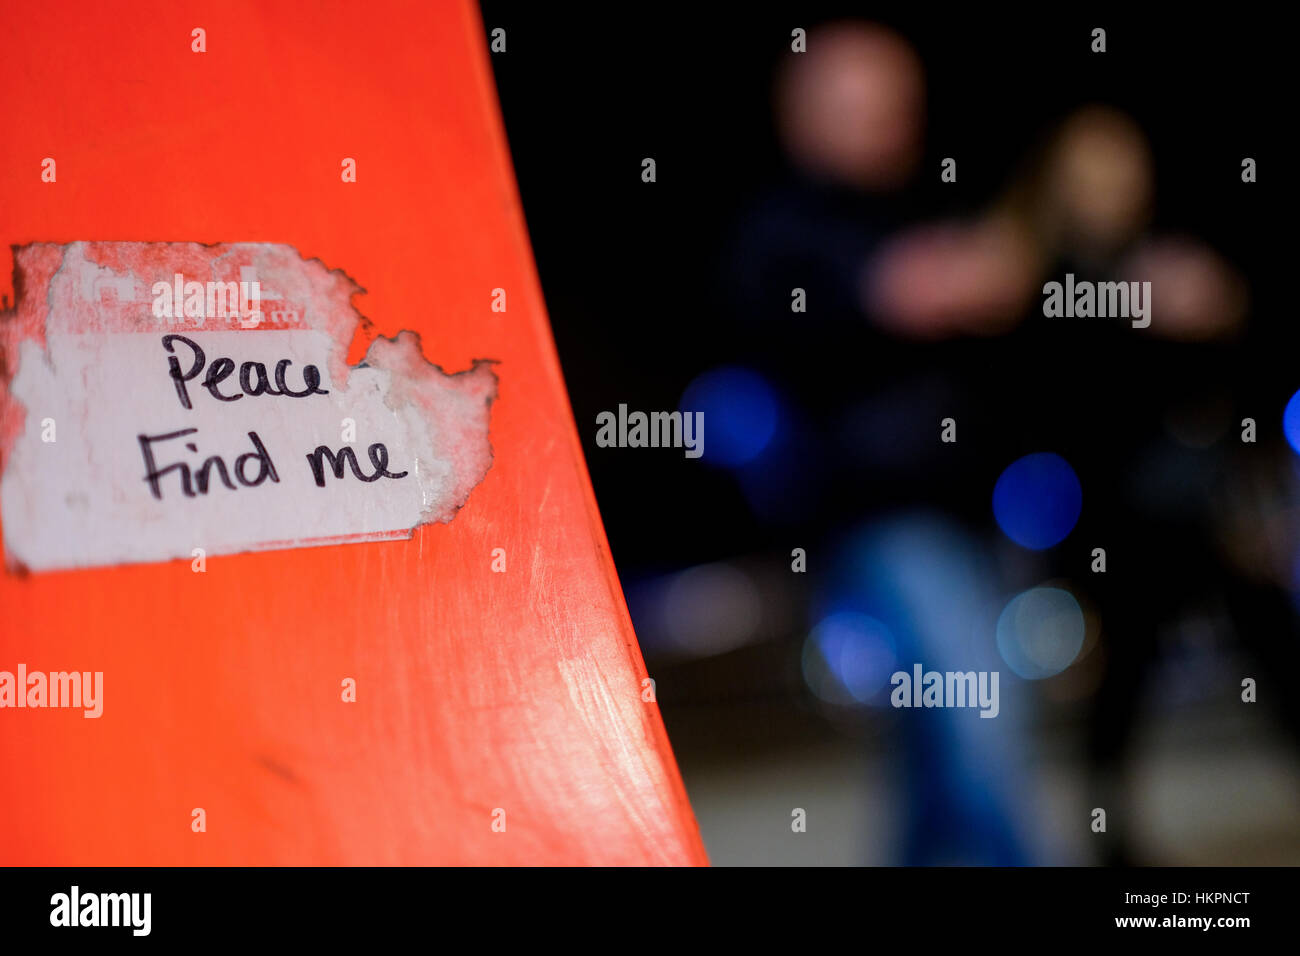 'Peace find me' sticker attached to the orange colour bench on Bankside; people passing in motion. Stock Photo